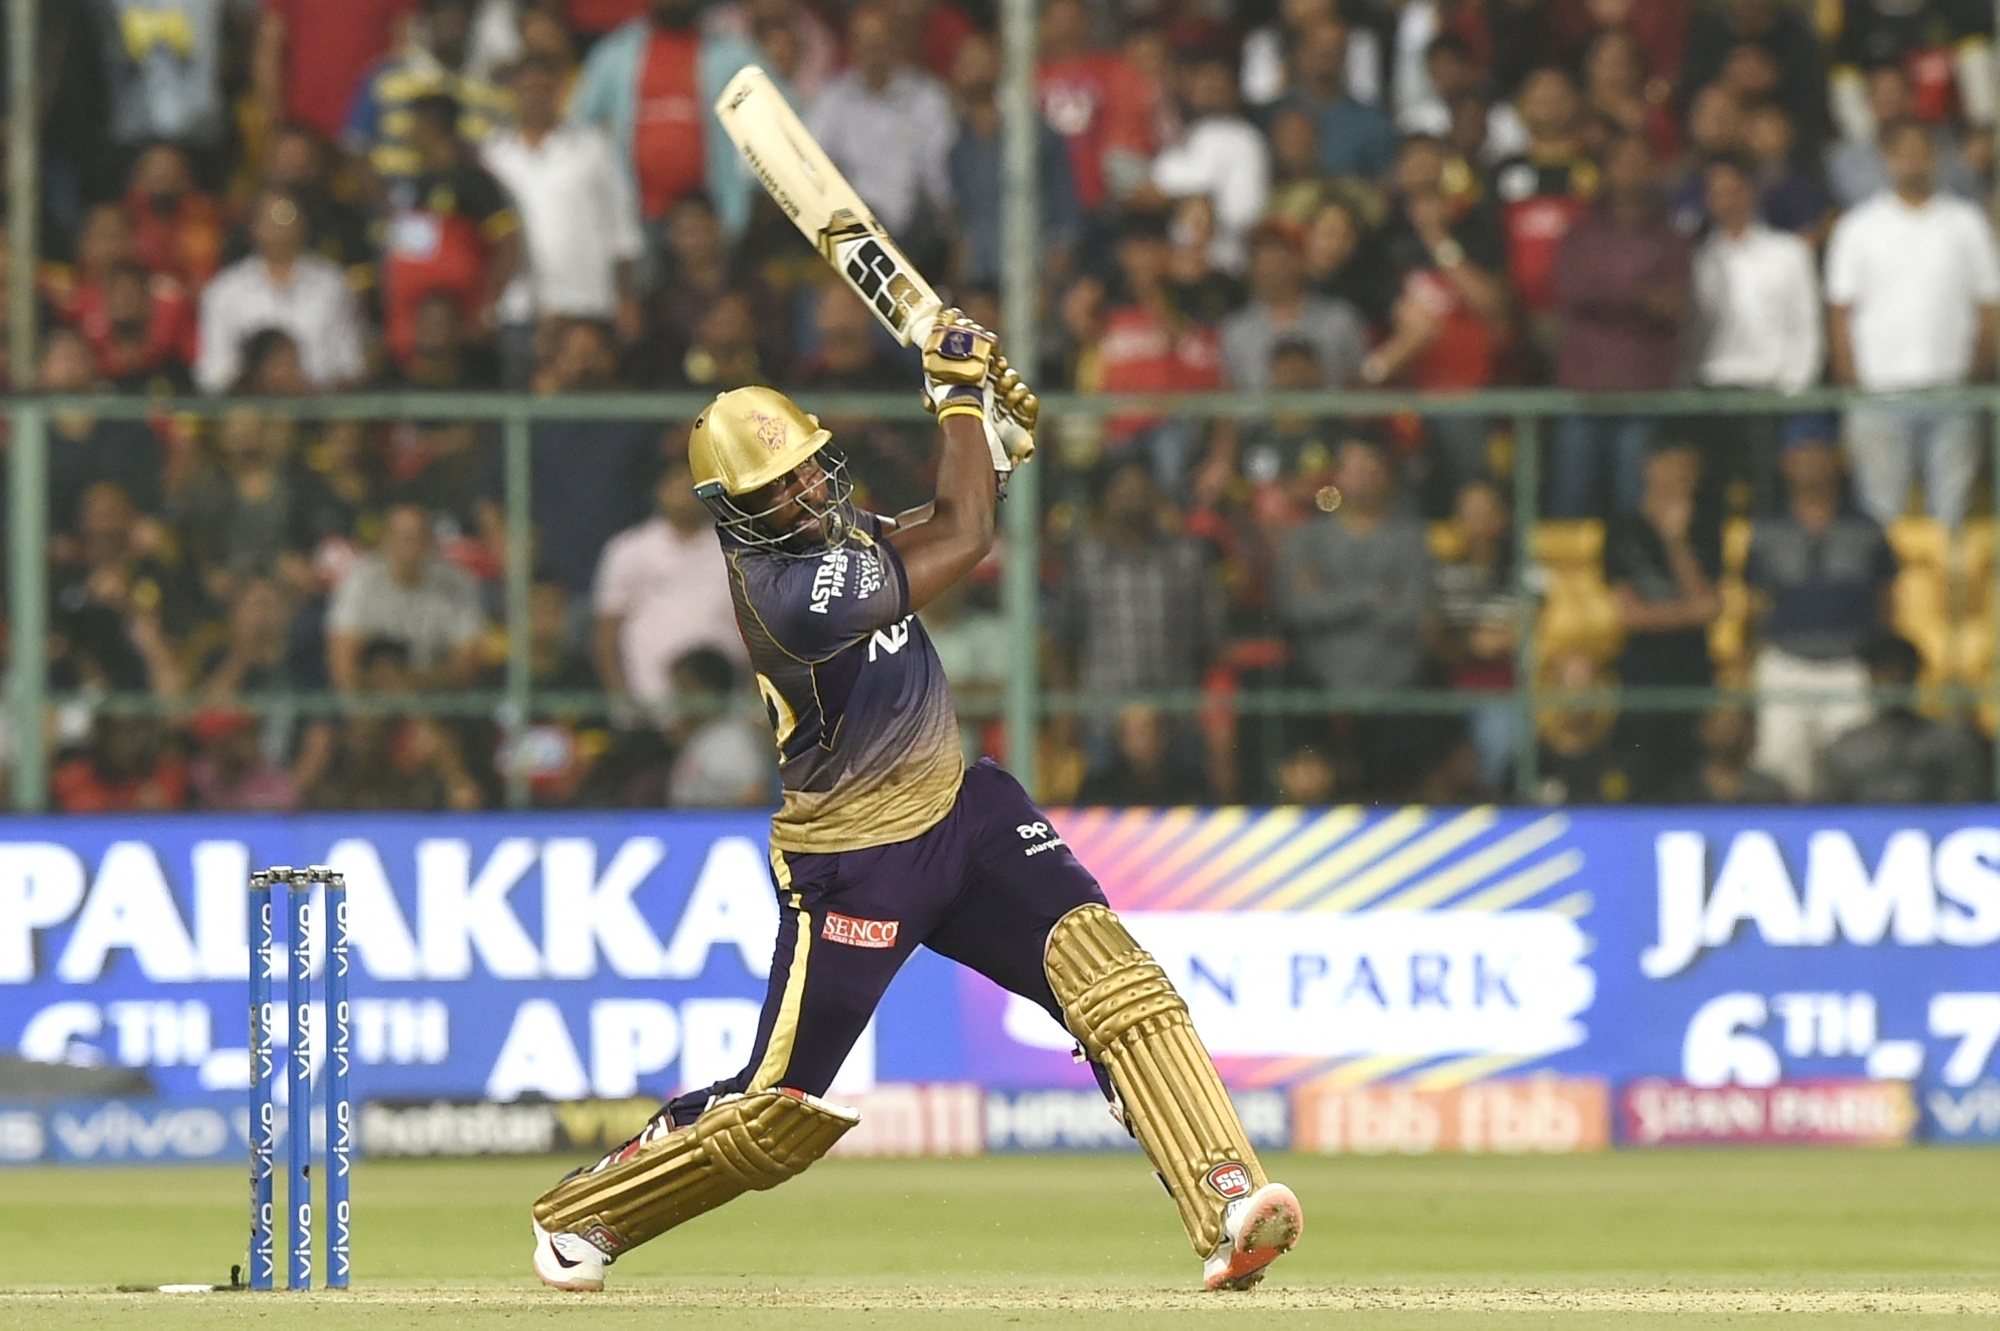 Kolkata Knight Riders: Andre Russell can even score a double hundred if he  bats at number 3 in IPL 2020: KKR mentor David Hussey